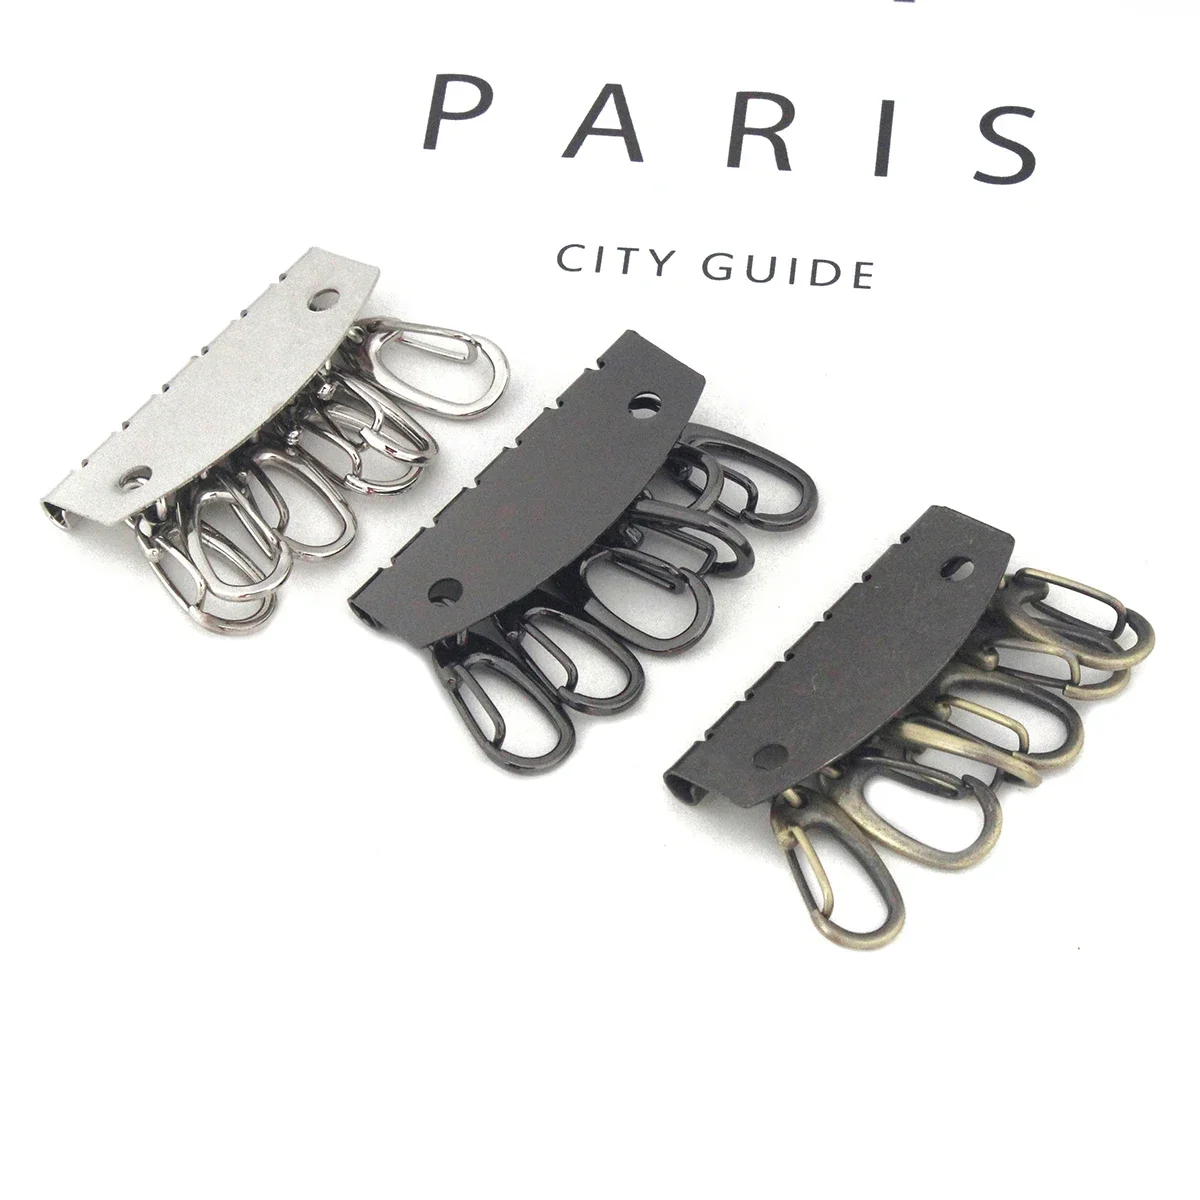 1PC Metal Key Holder Key Row Keyring Organnizer with 6 Snap Hook for Leather Craft Wallet Key Case Purse Bag Parts Accessories